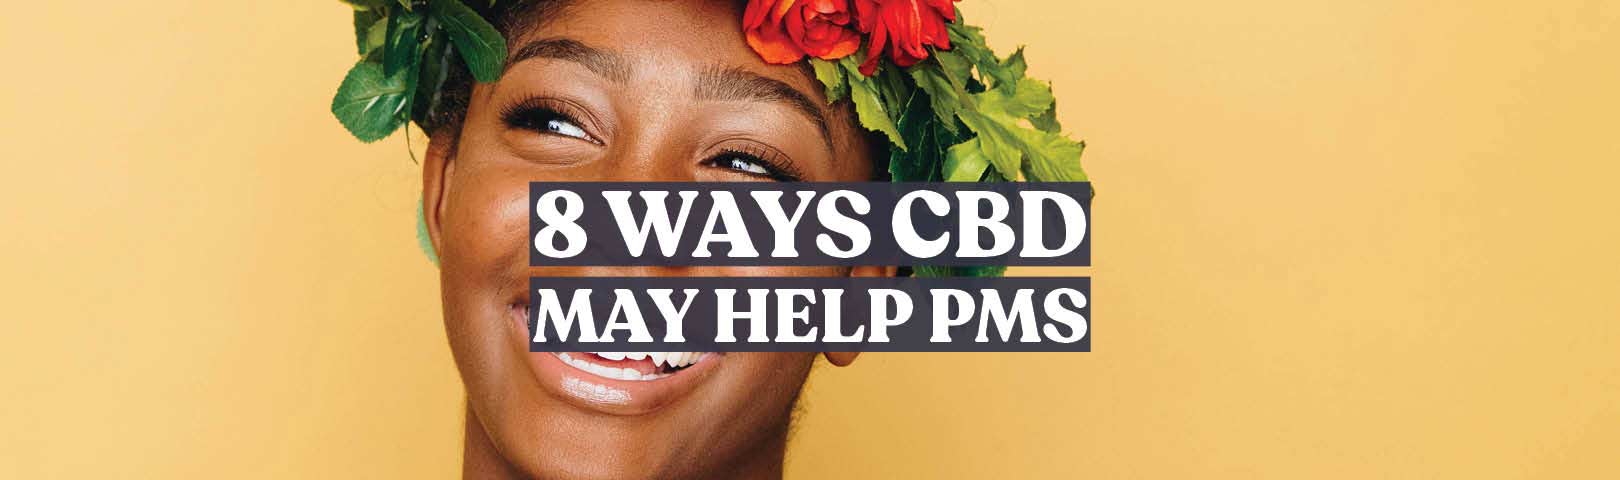 CBD For PMS Support and Symptom Relief